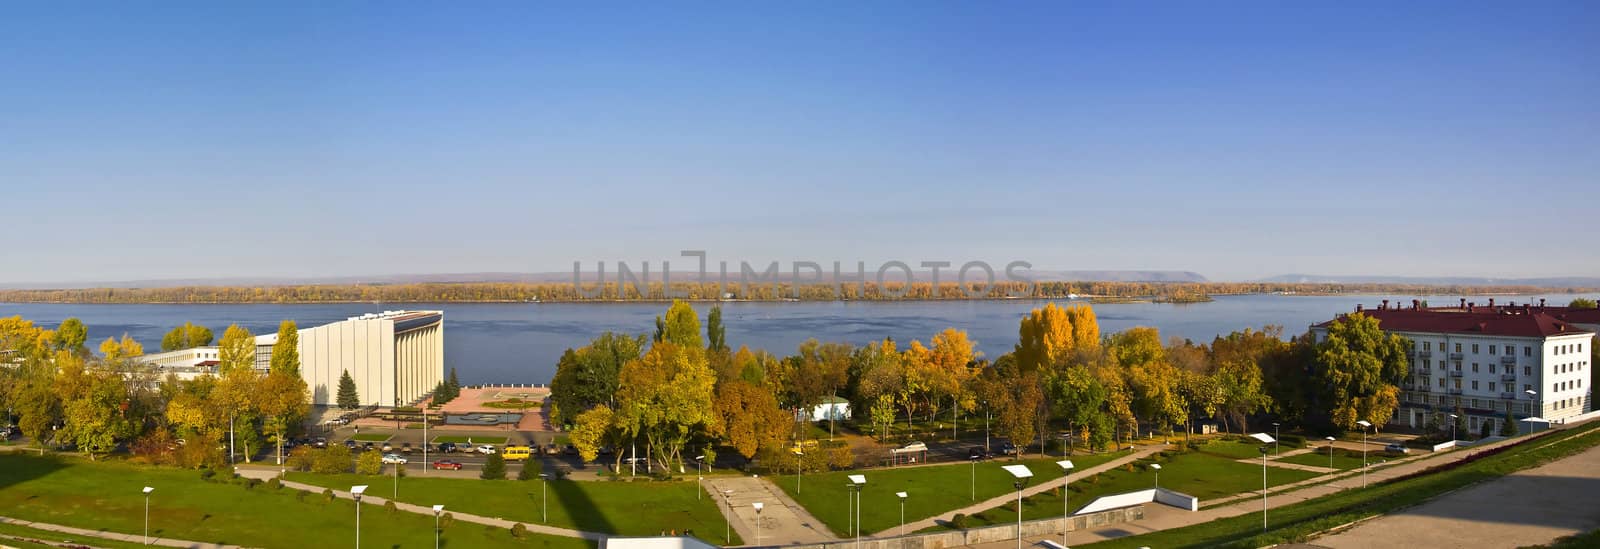 Panorama of a large city on the banks of the river. Samara, Russia. Autumn Landscape.